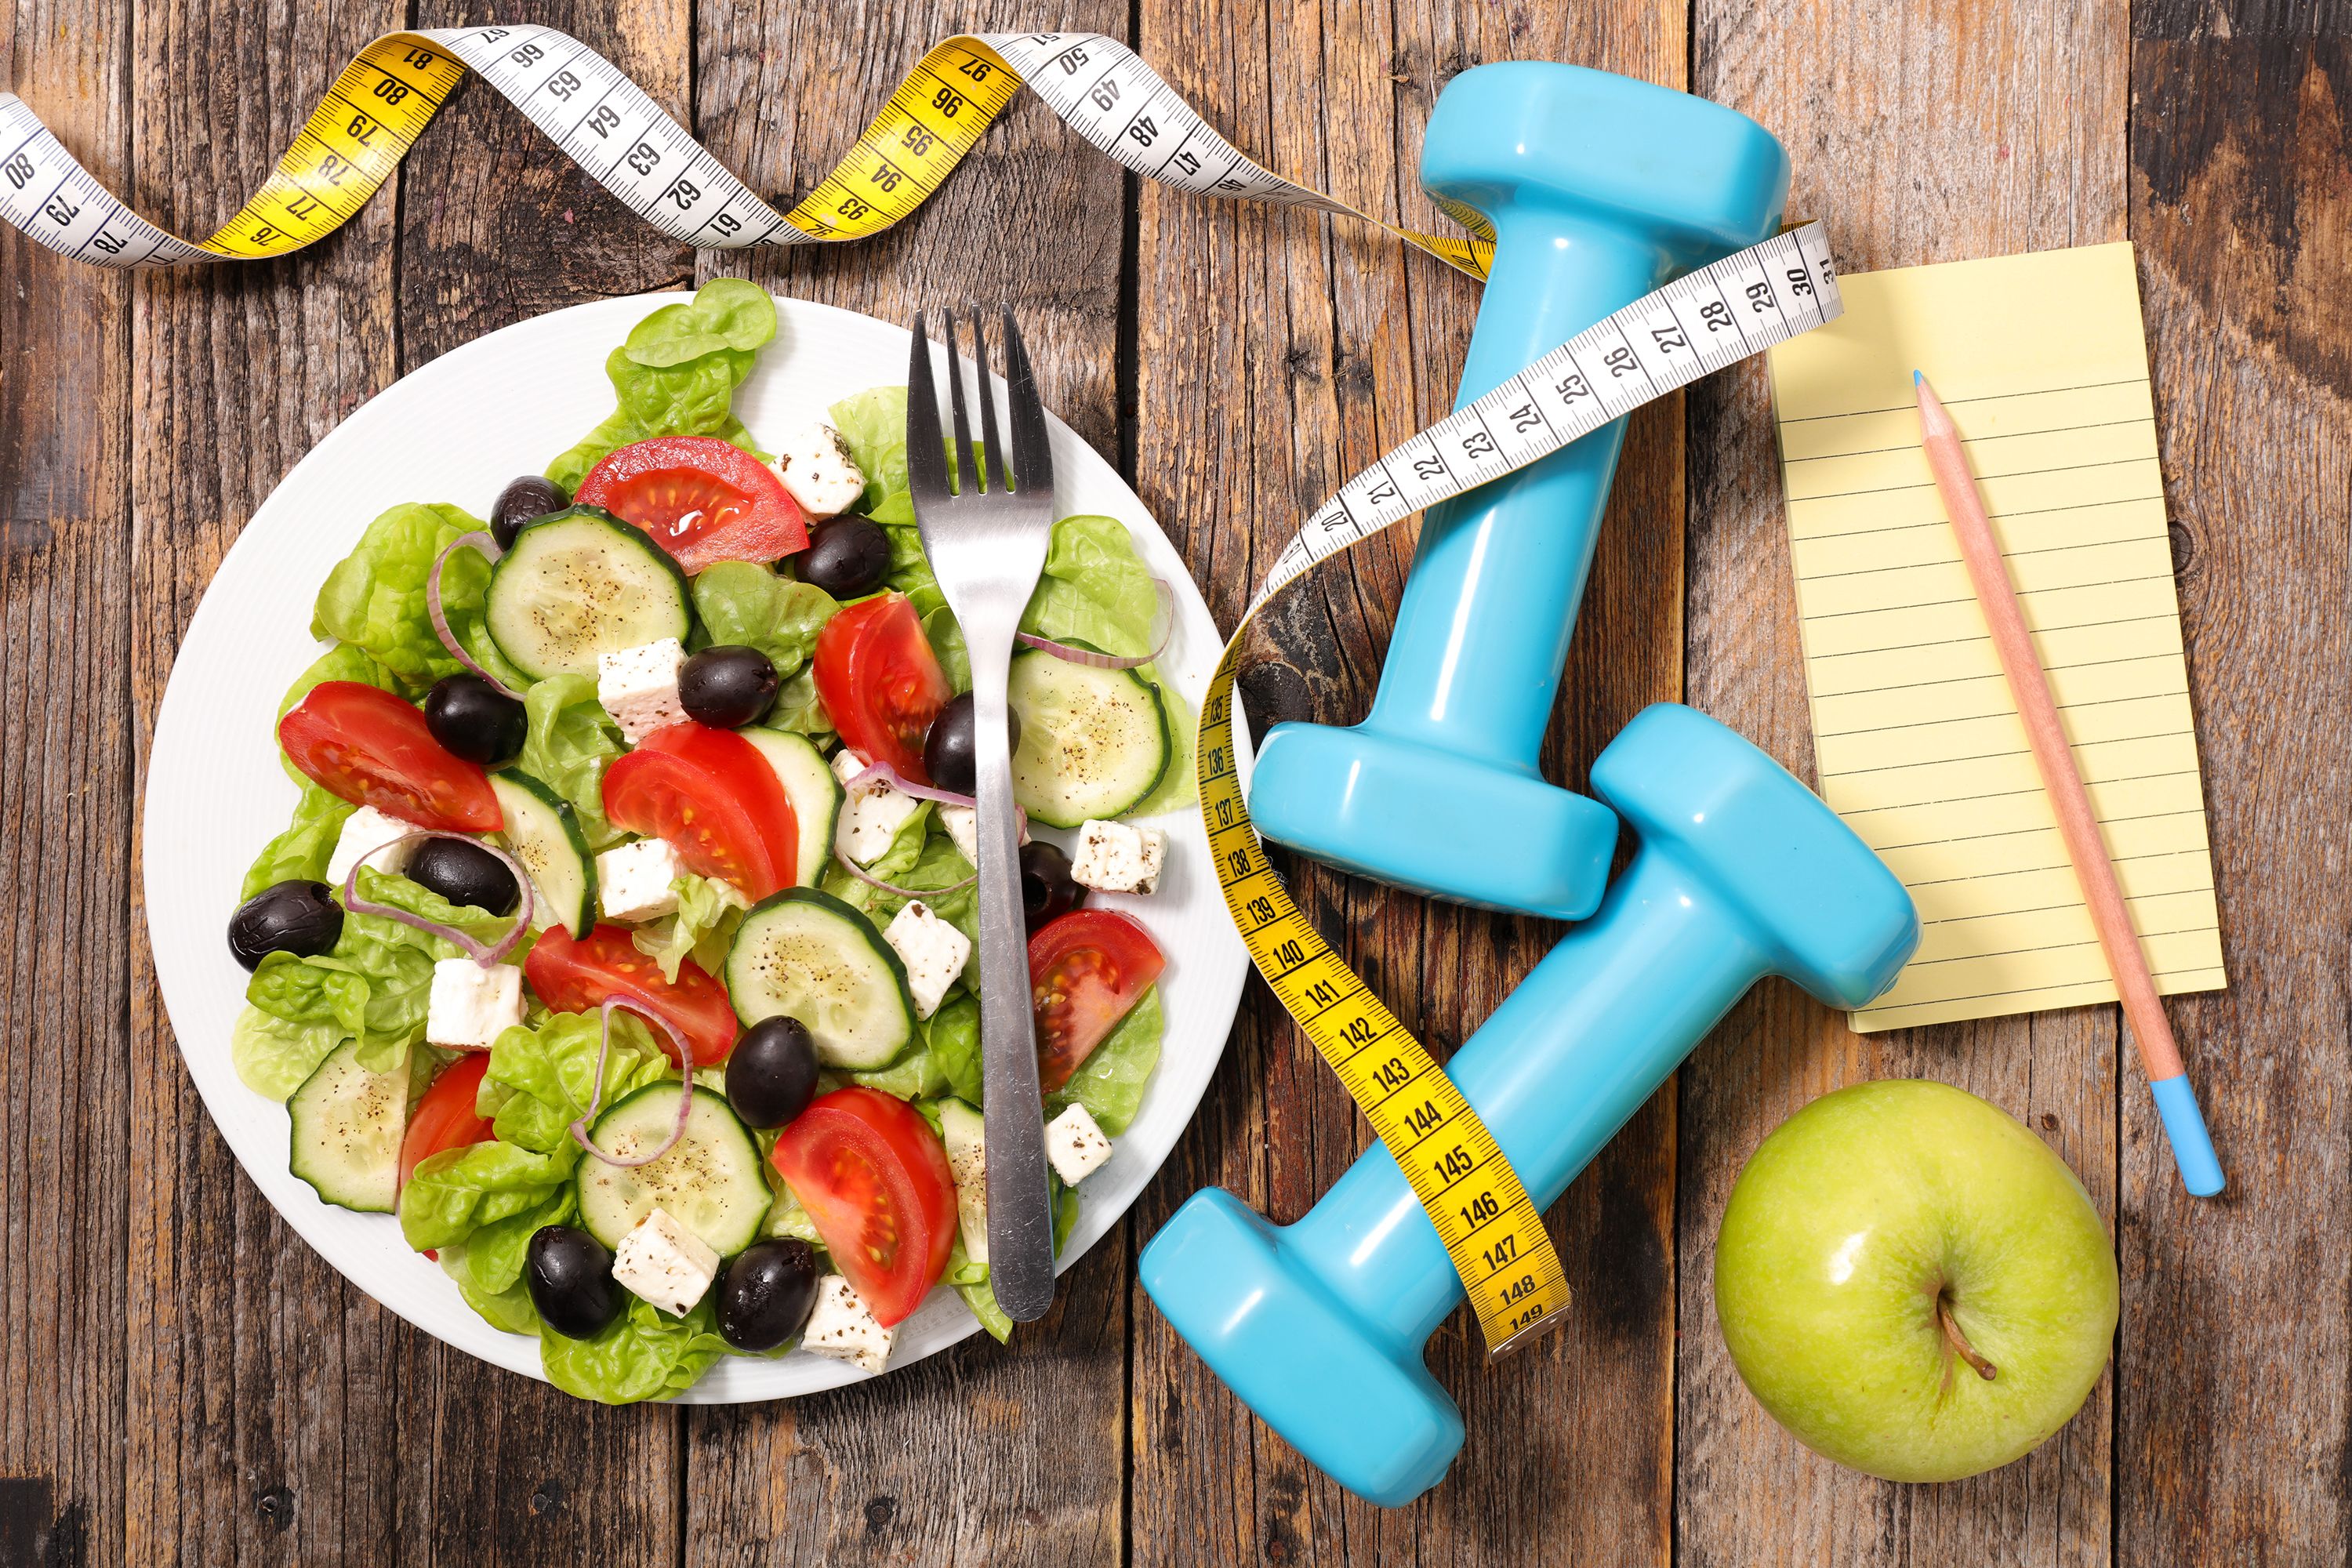 Kick diet culture out of your diet, experts say. How to start | CNN